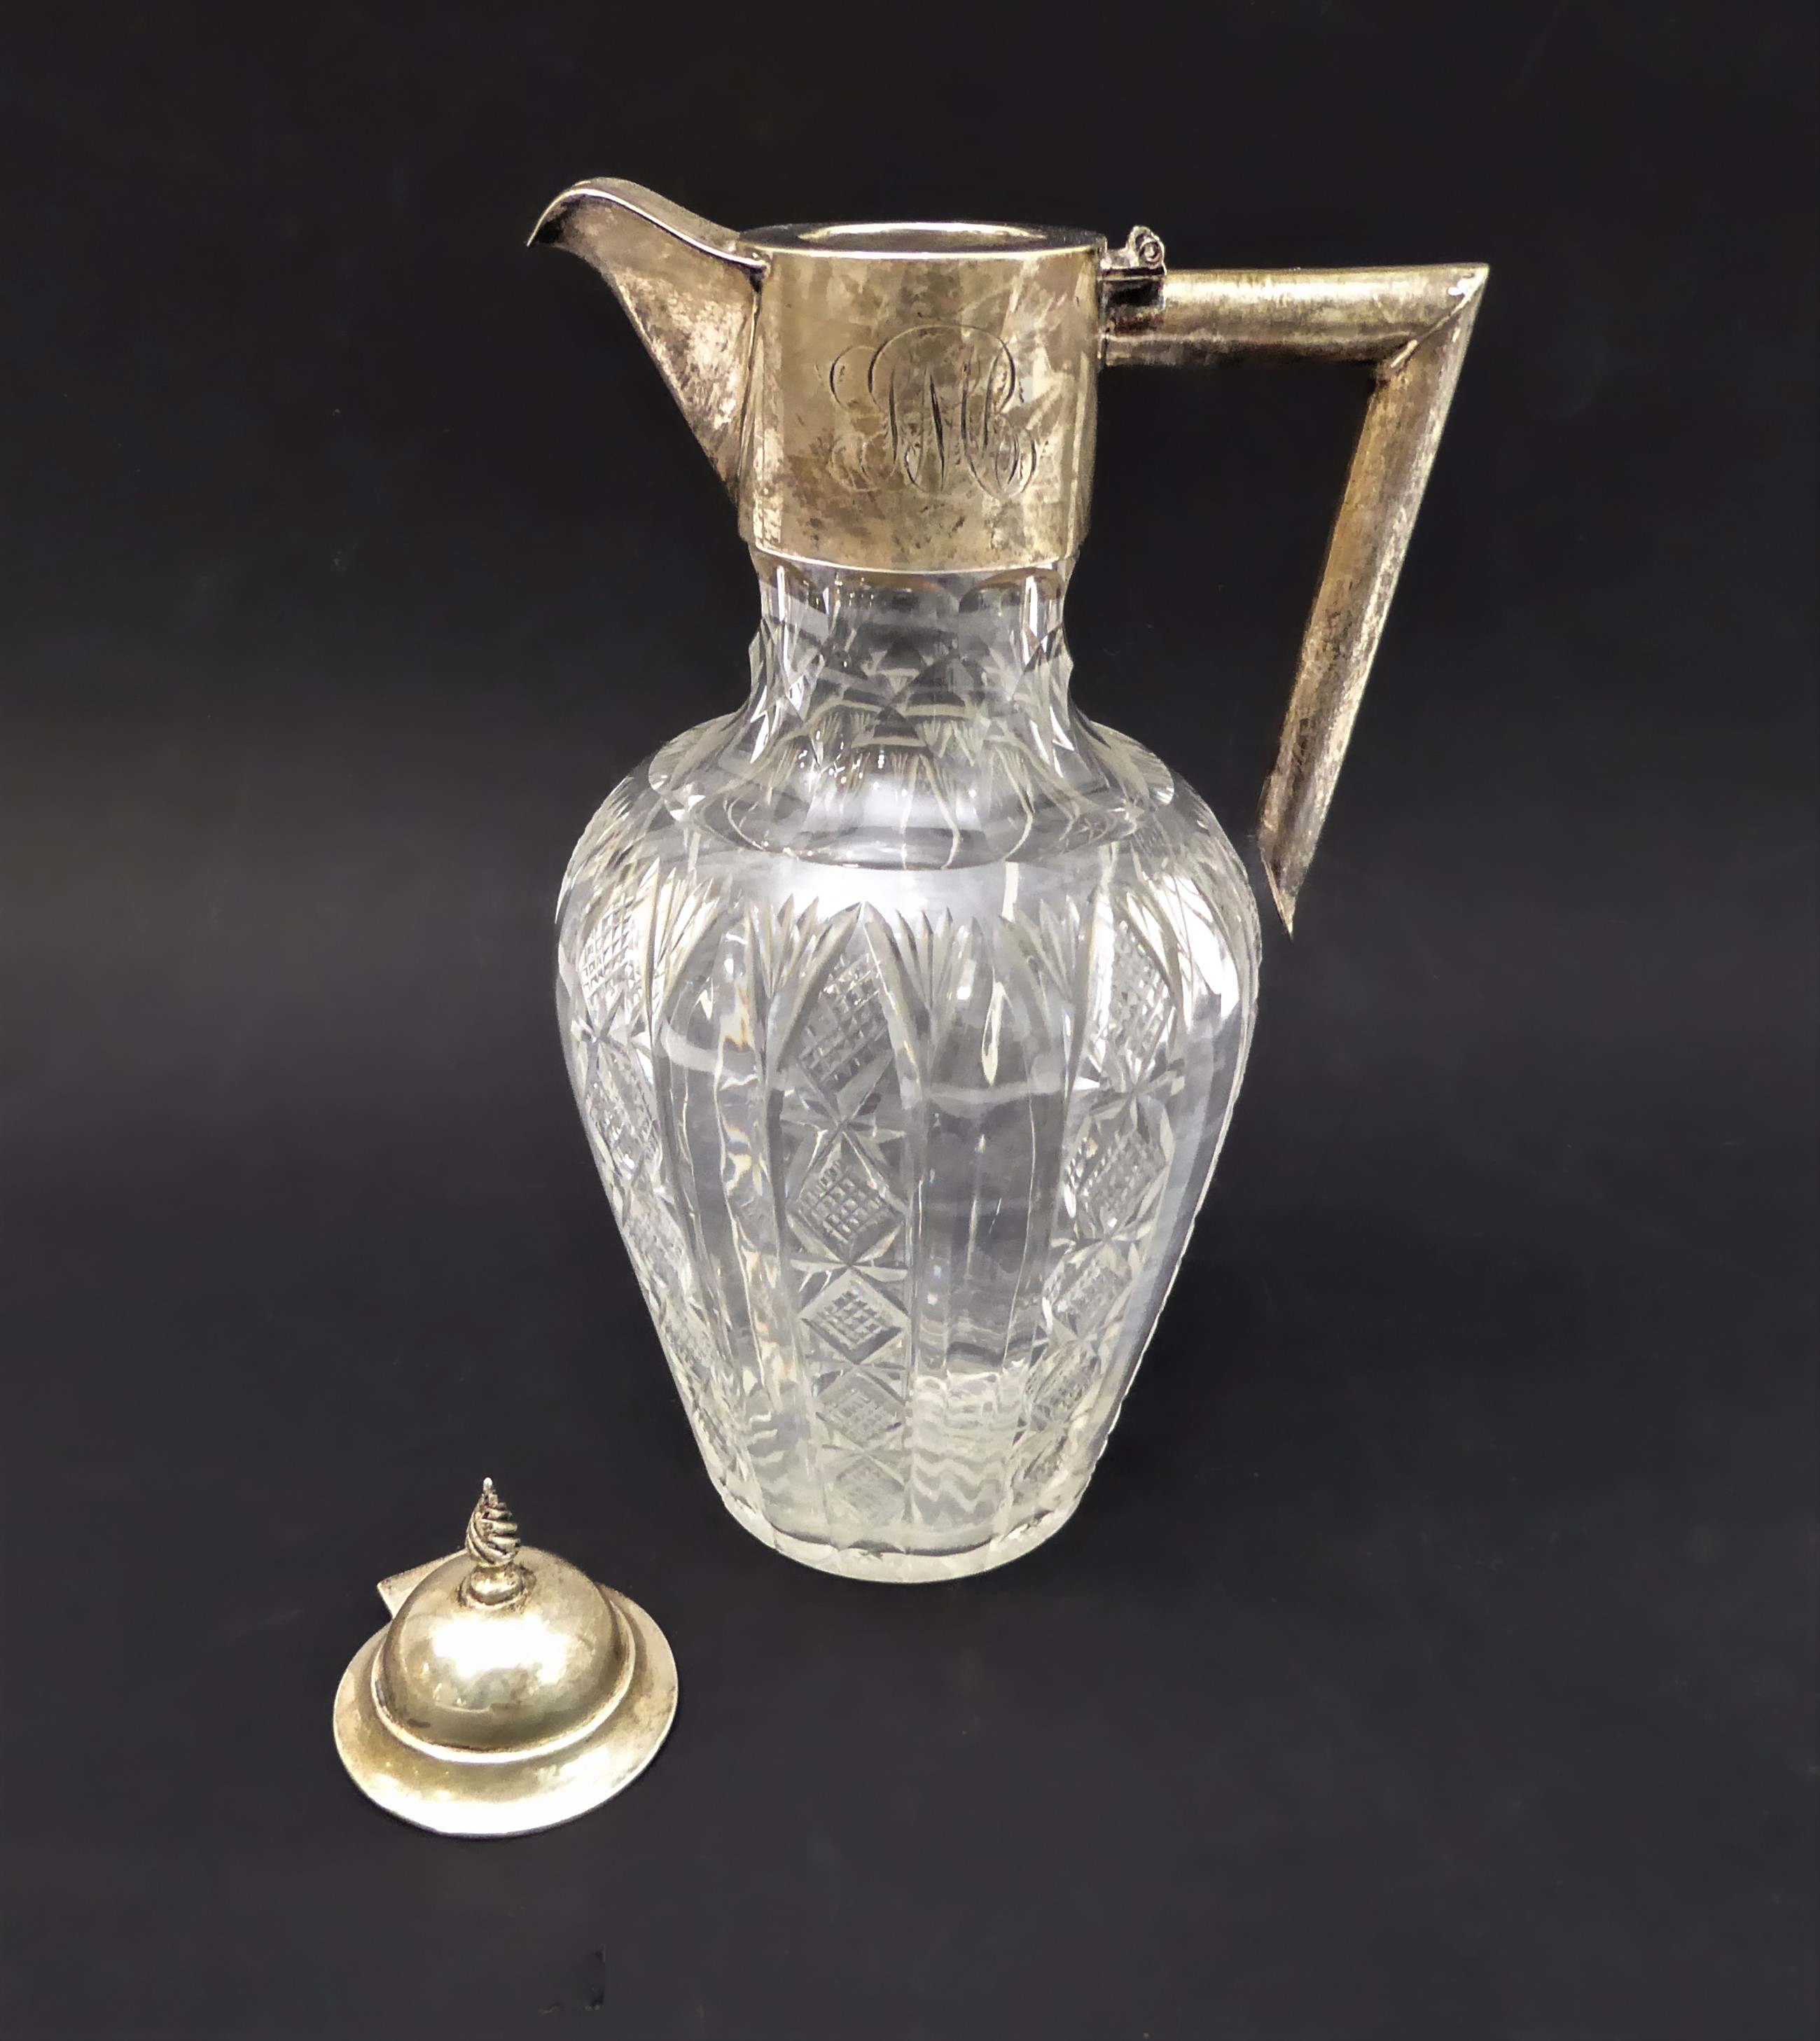 An early 20th century silver-mounted cut-glass claret jug, assayed Chester 1901 (hinged cover now